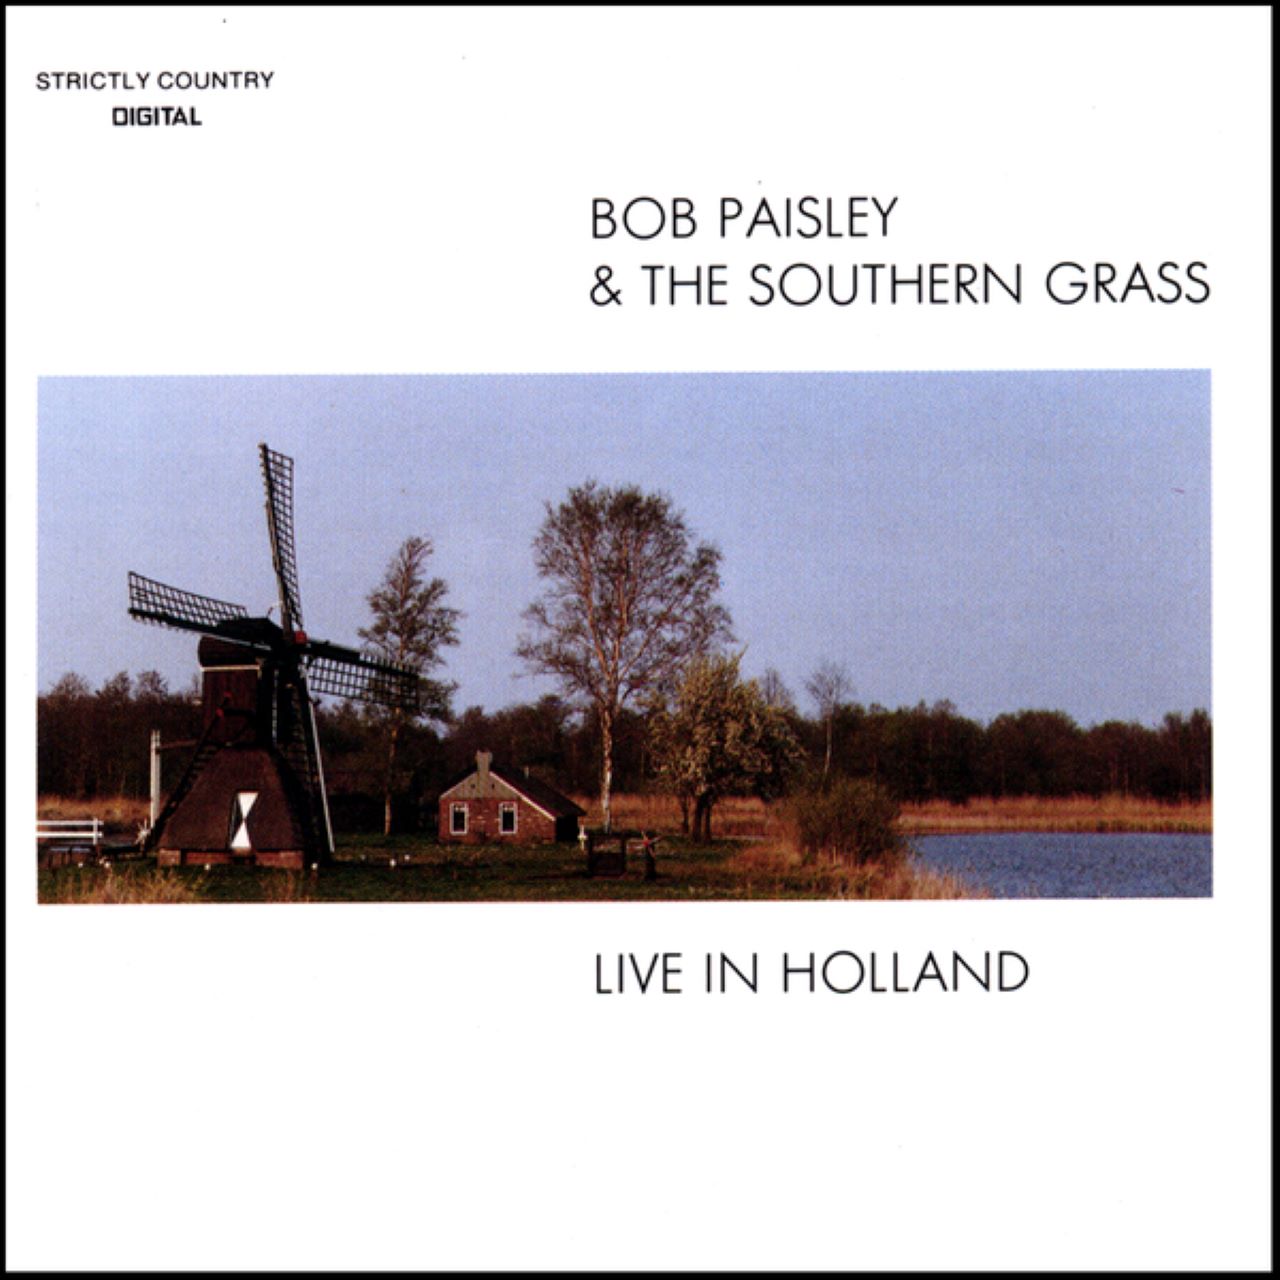 Bob Paisley & Southern Grass - Live in Holland cover album